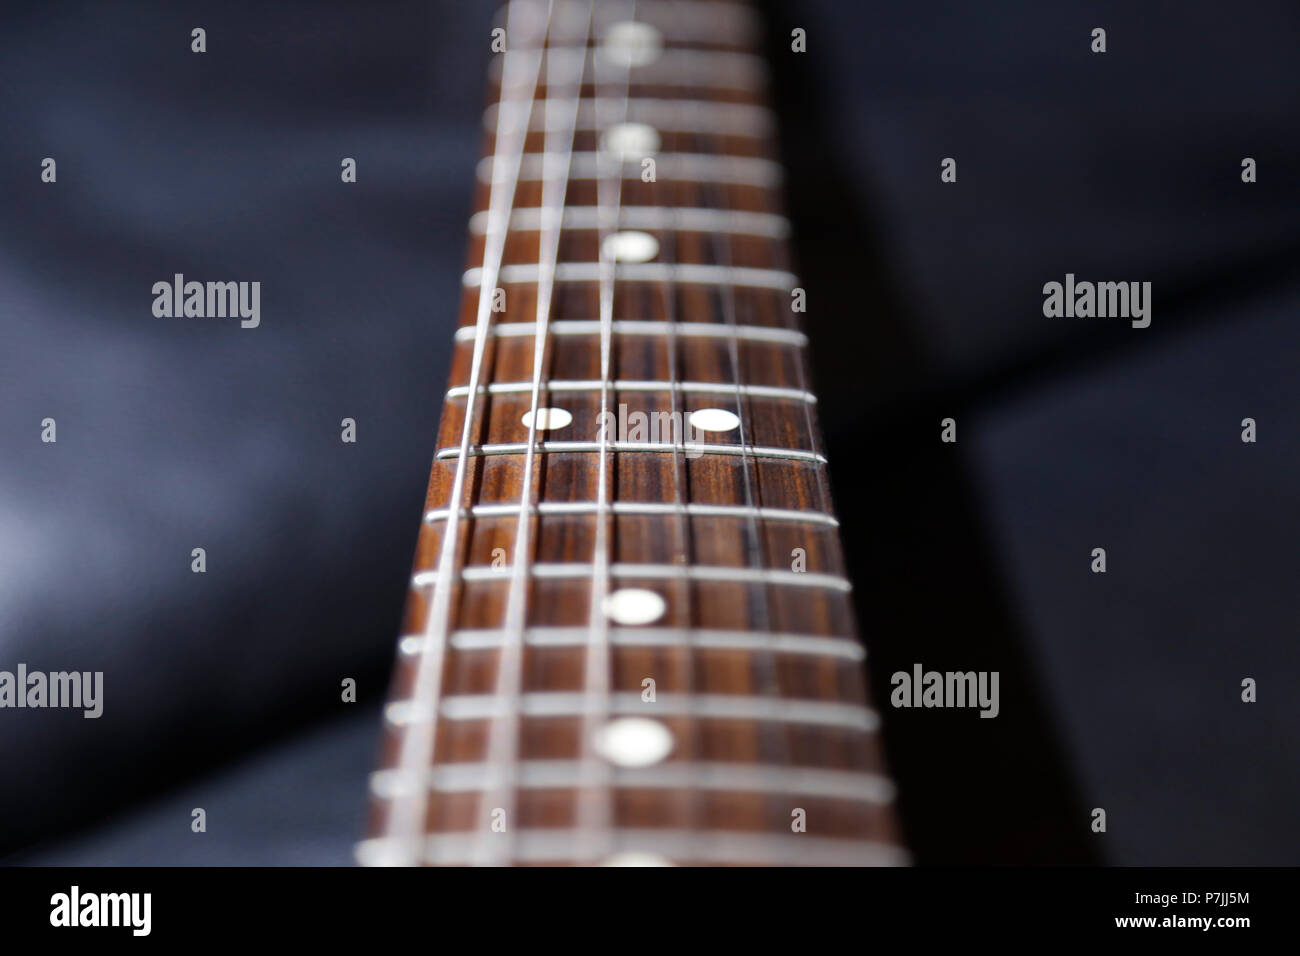 Detail of guitar neck and strings Stock Photo